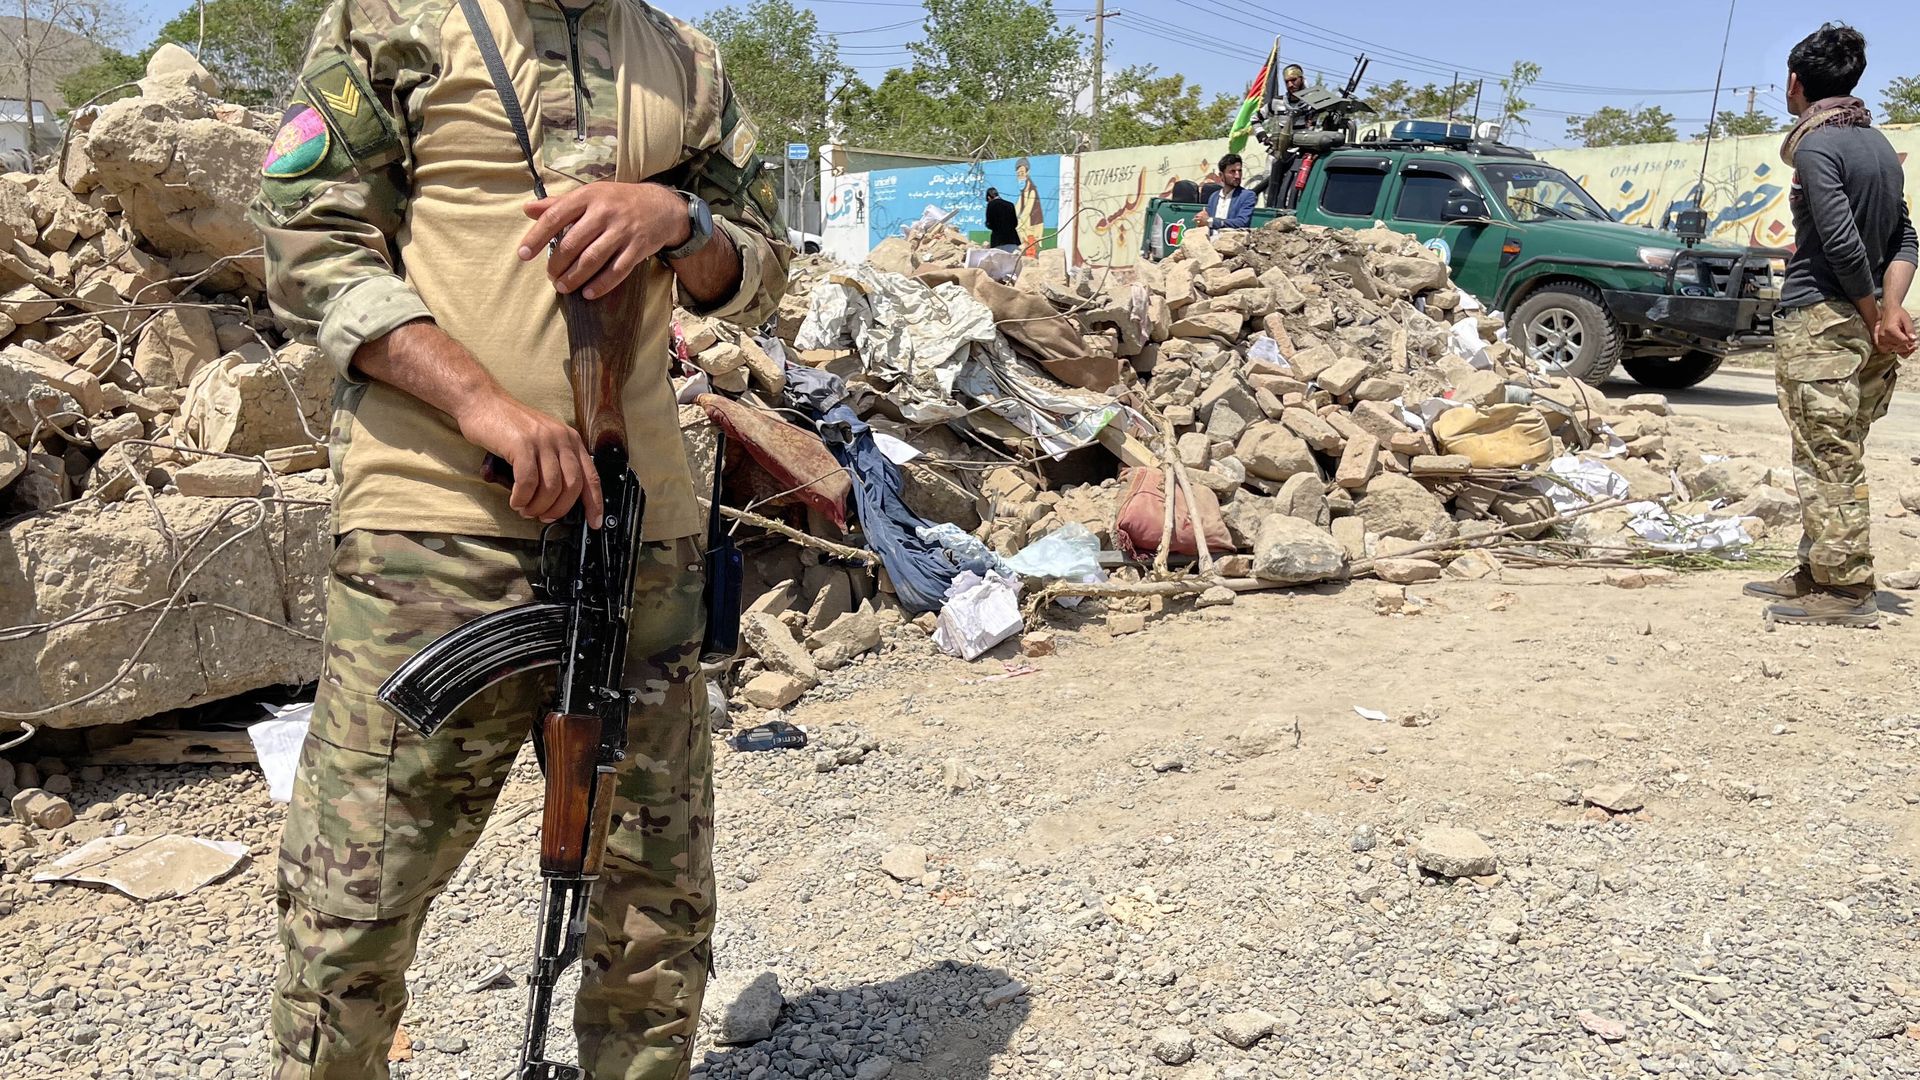  Afghanistan security personnel on May 1 inspecting the site of a vehicle bombing that killed at least 25 people  Logar Province, Afghanistan.